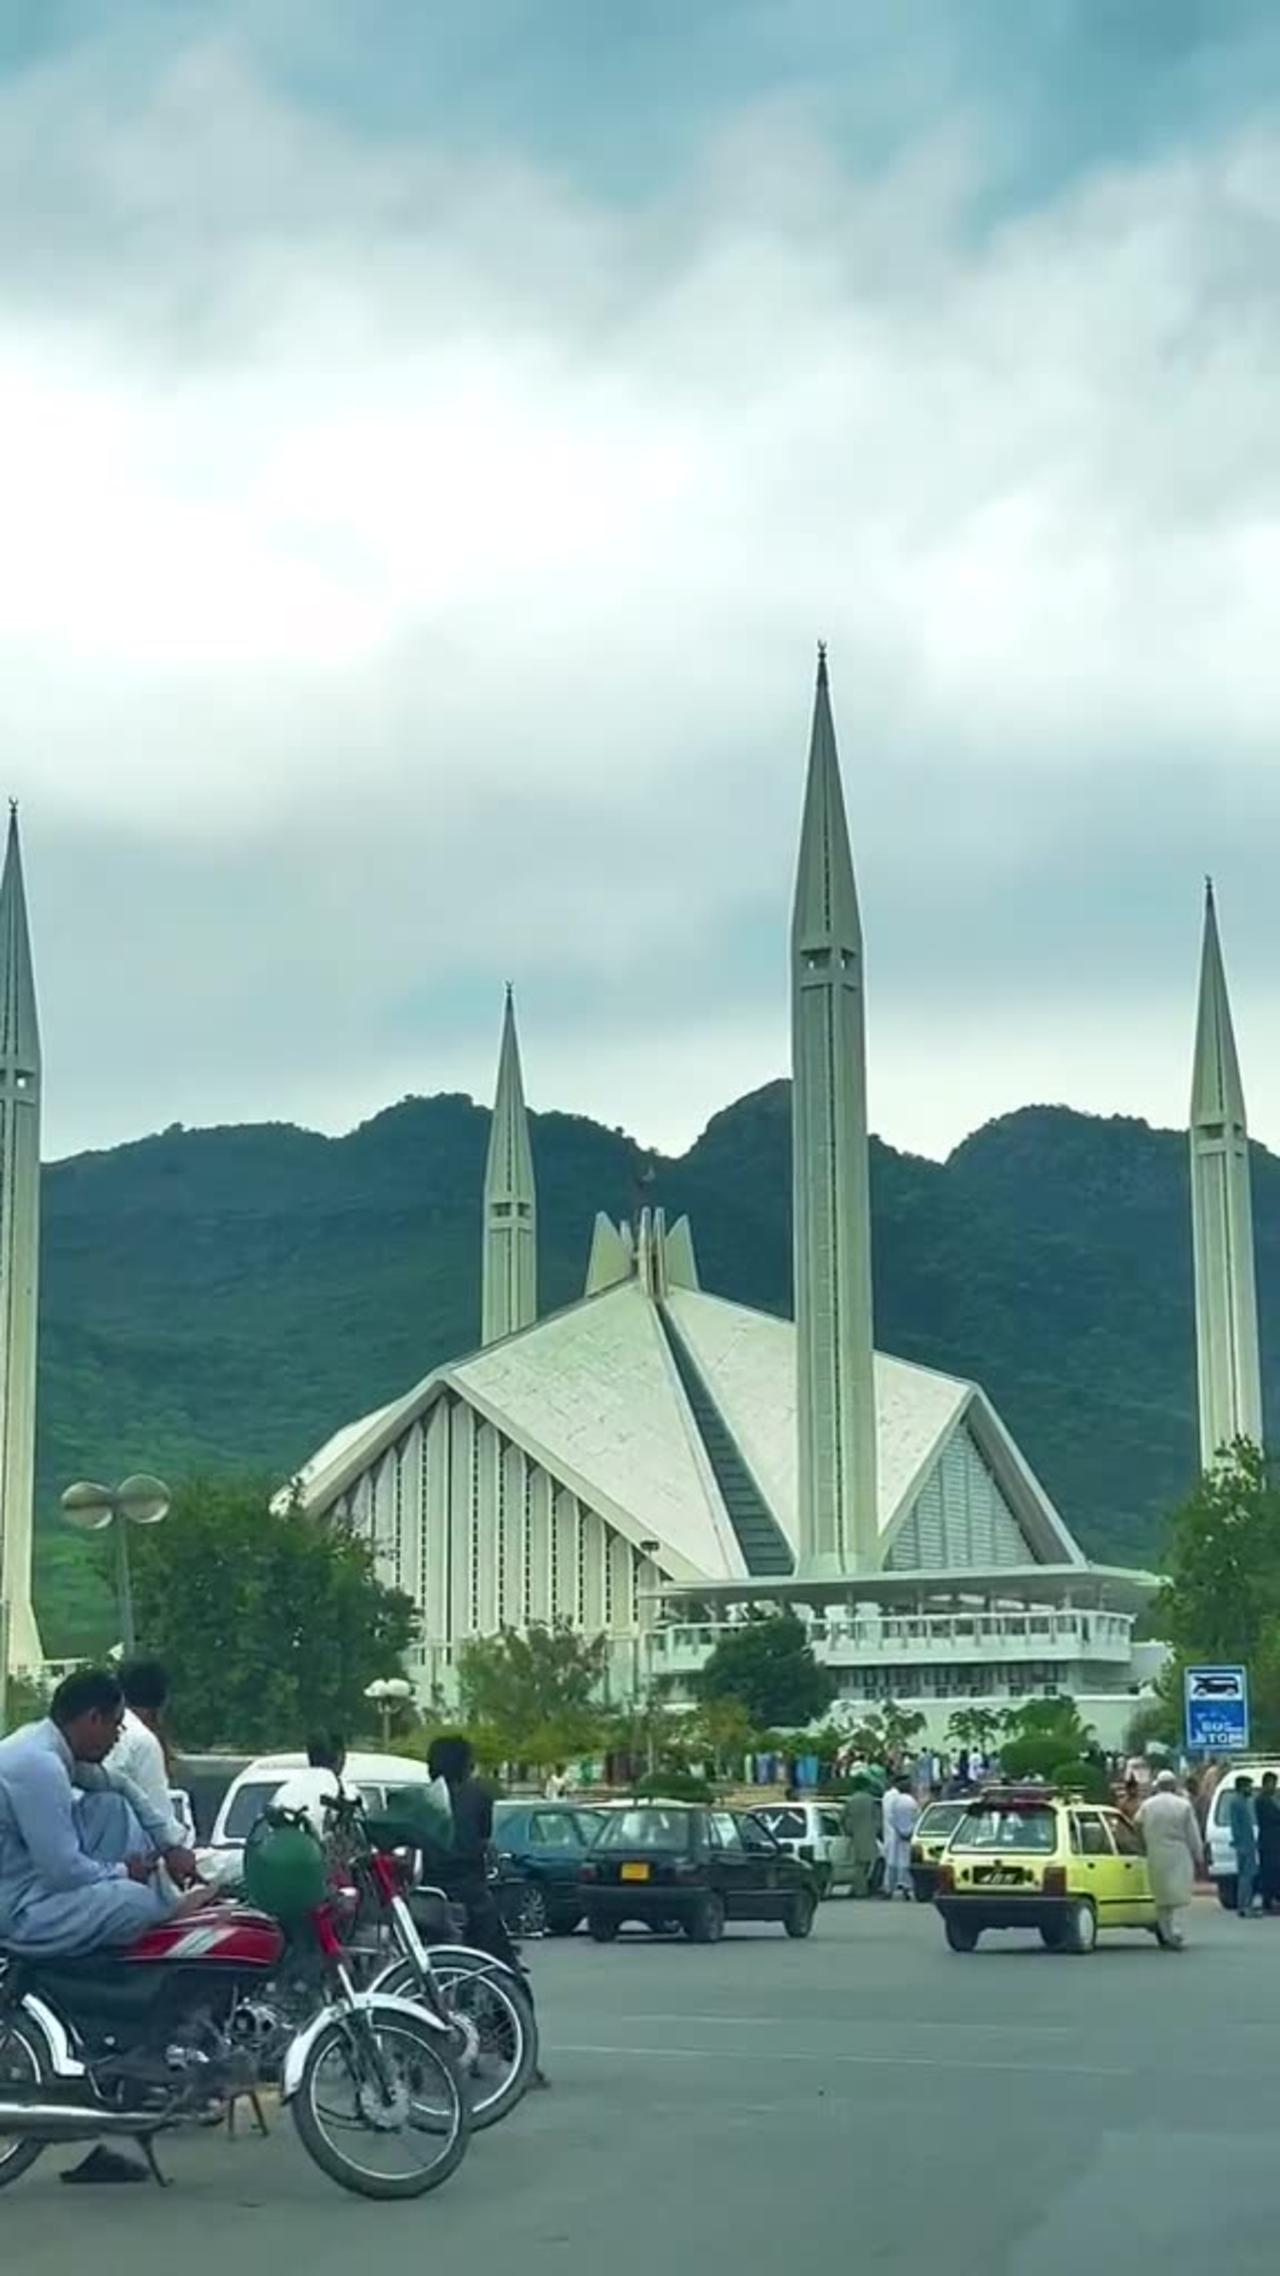 "Harmony in Stone and Nature: Faisal Mosque Framed by Breathtaking Hills"